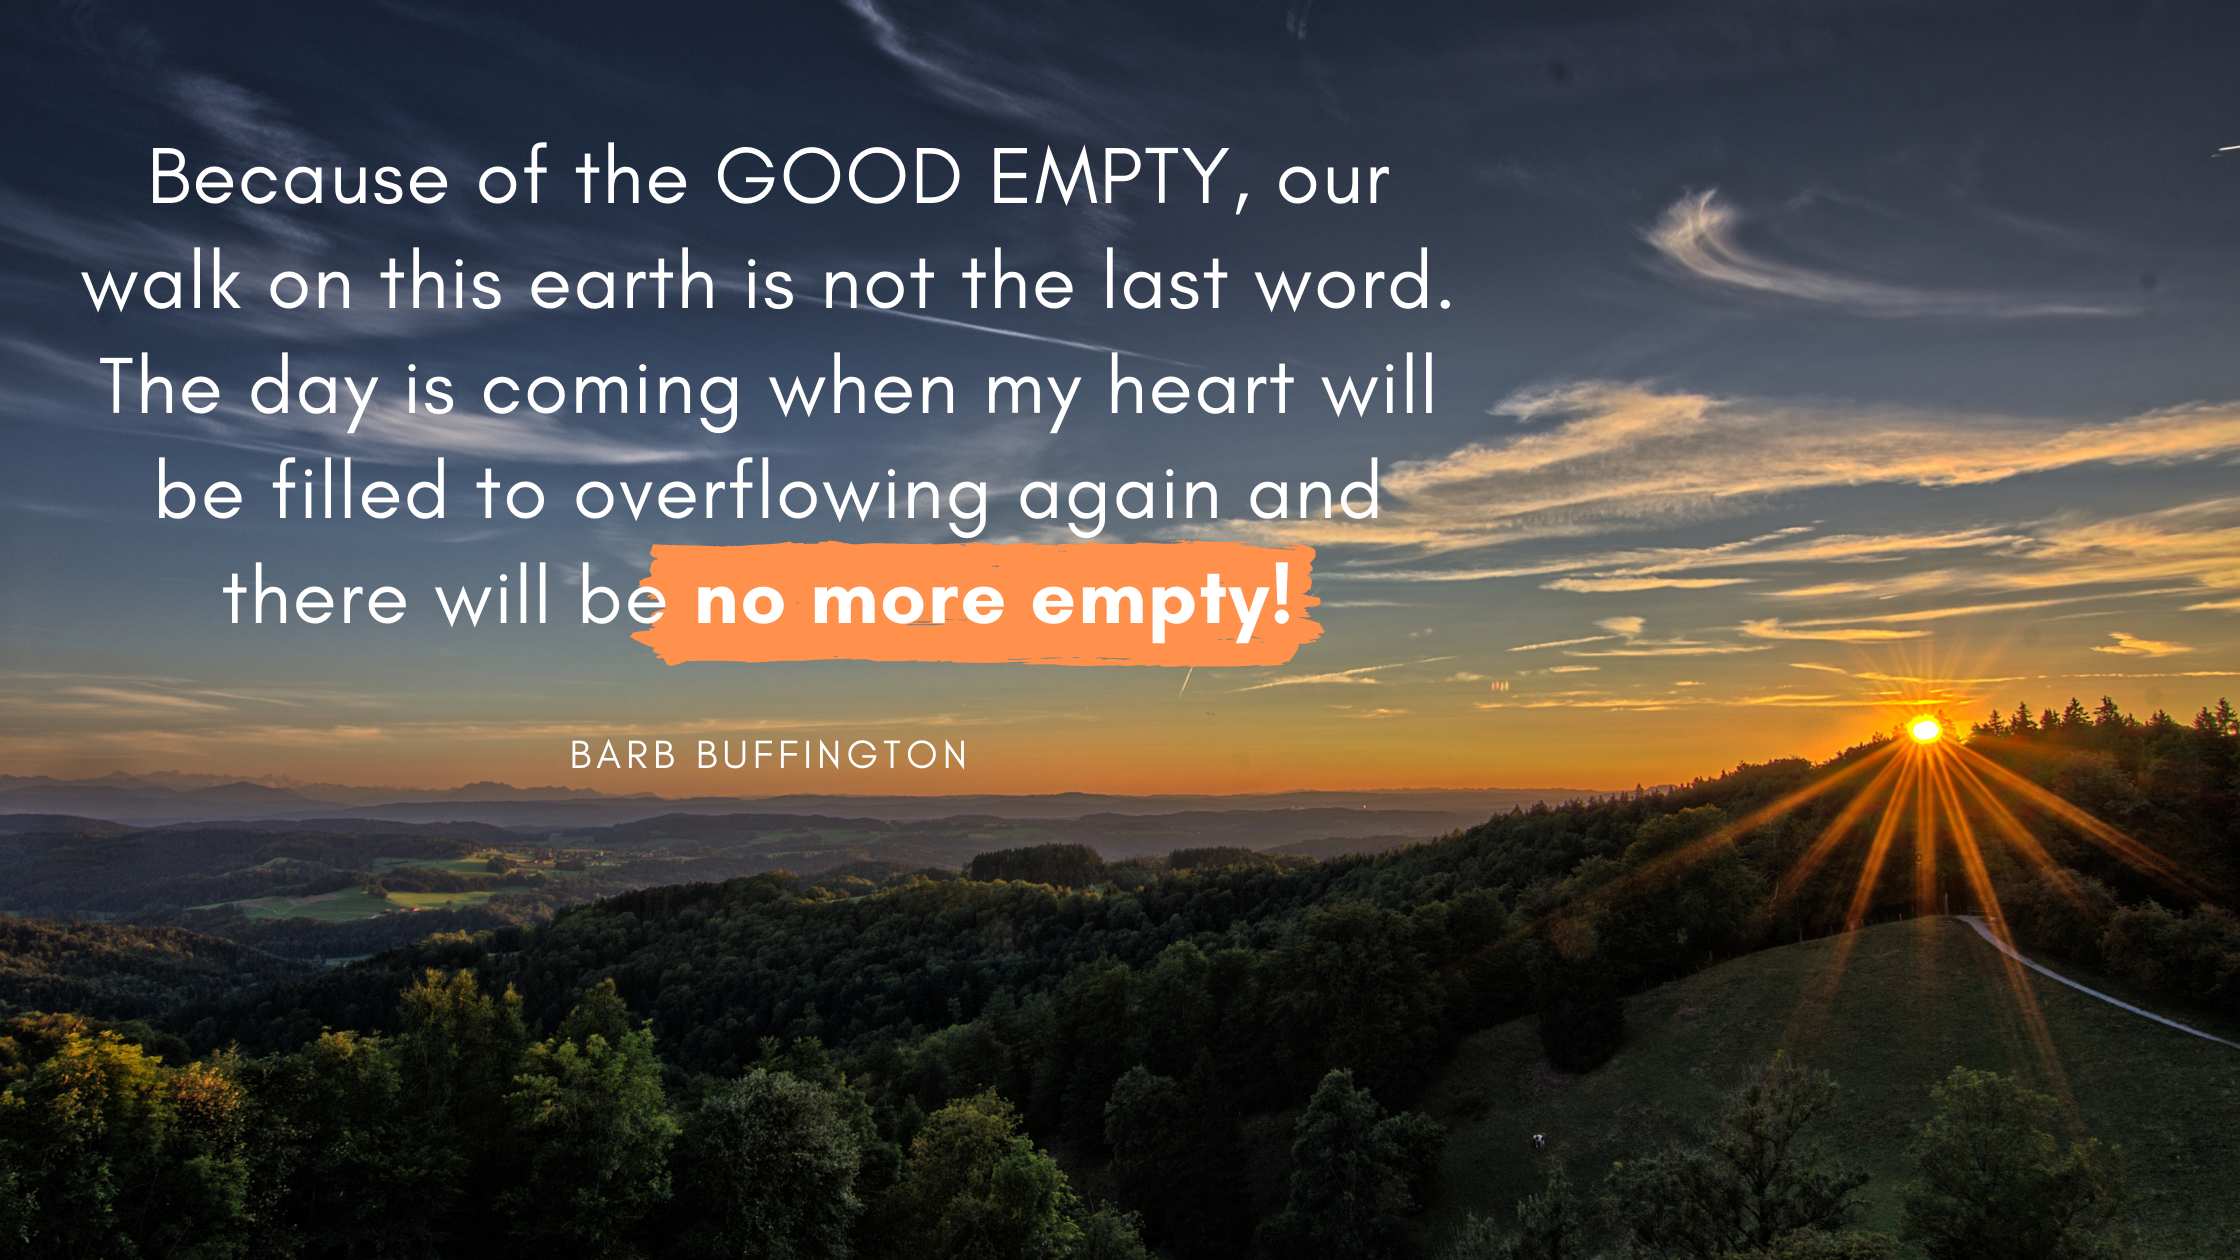 because of the GOOD EMPTY, our walk on this earth is not the last word, and the day is coming when my heart will be filled to overflowing again and th